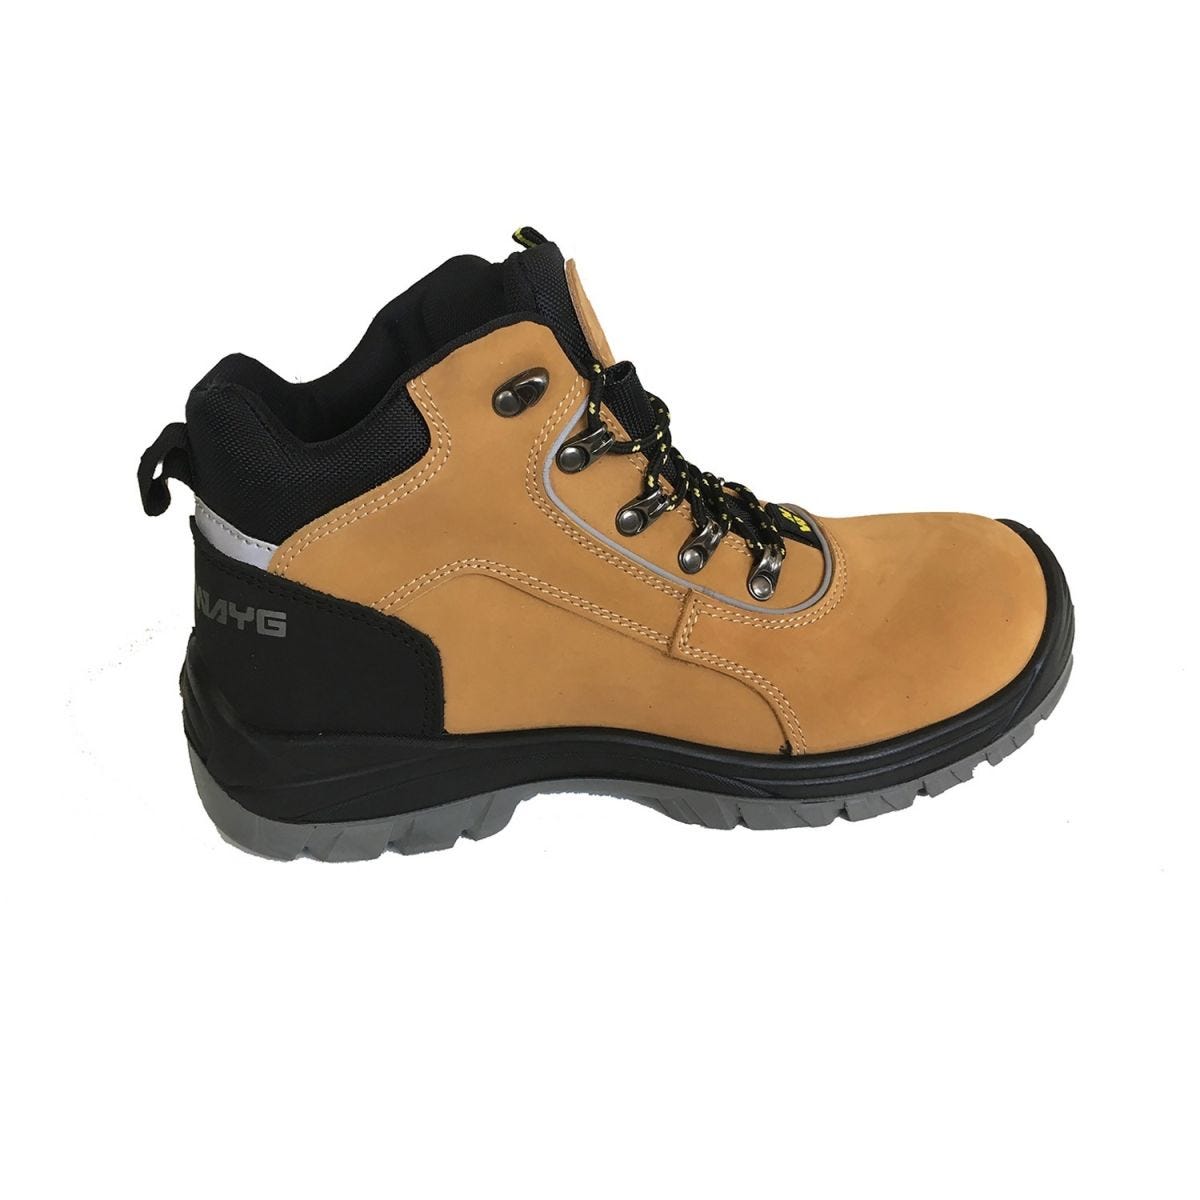 CHAUSSURES MONTANTES DE SECURITE RYAN CAMEL - NORTH WAYS - Taille 40 1